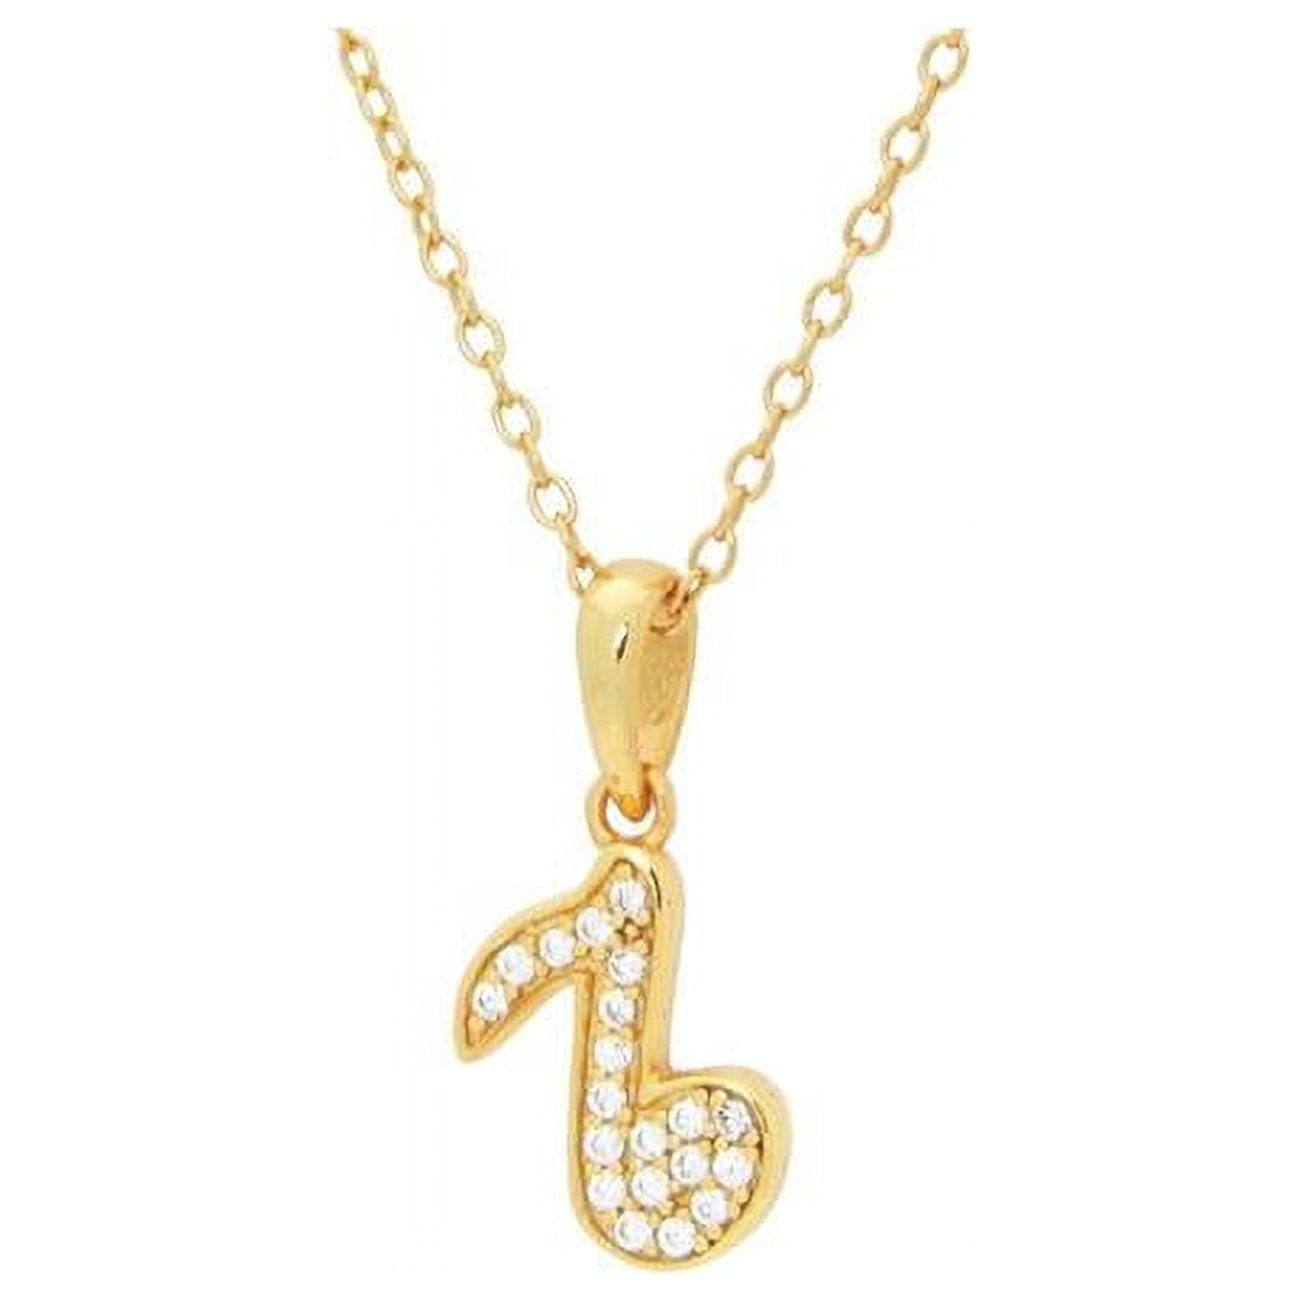 111206g 16 & 2 In. Teens Sparkling Cz Corchea Pendant Necklace In Gold Plated Silver